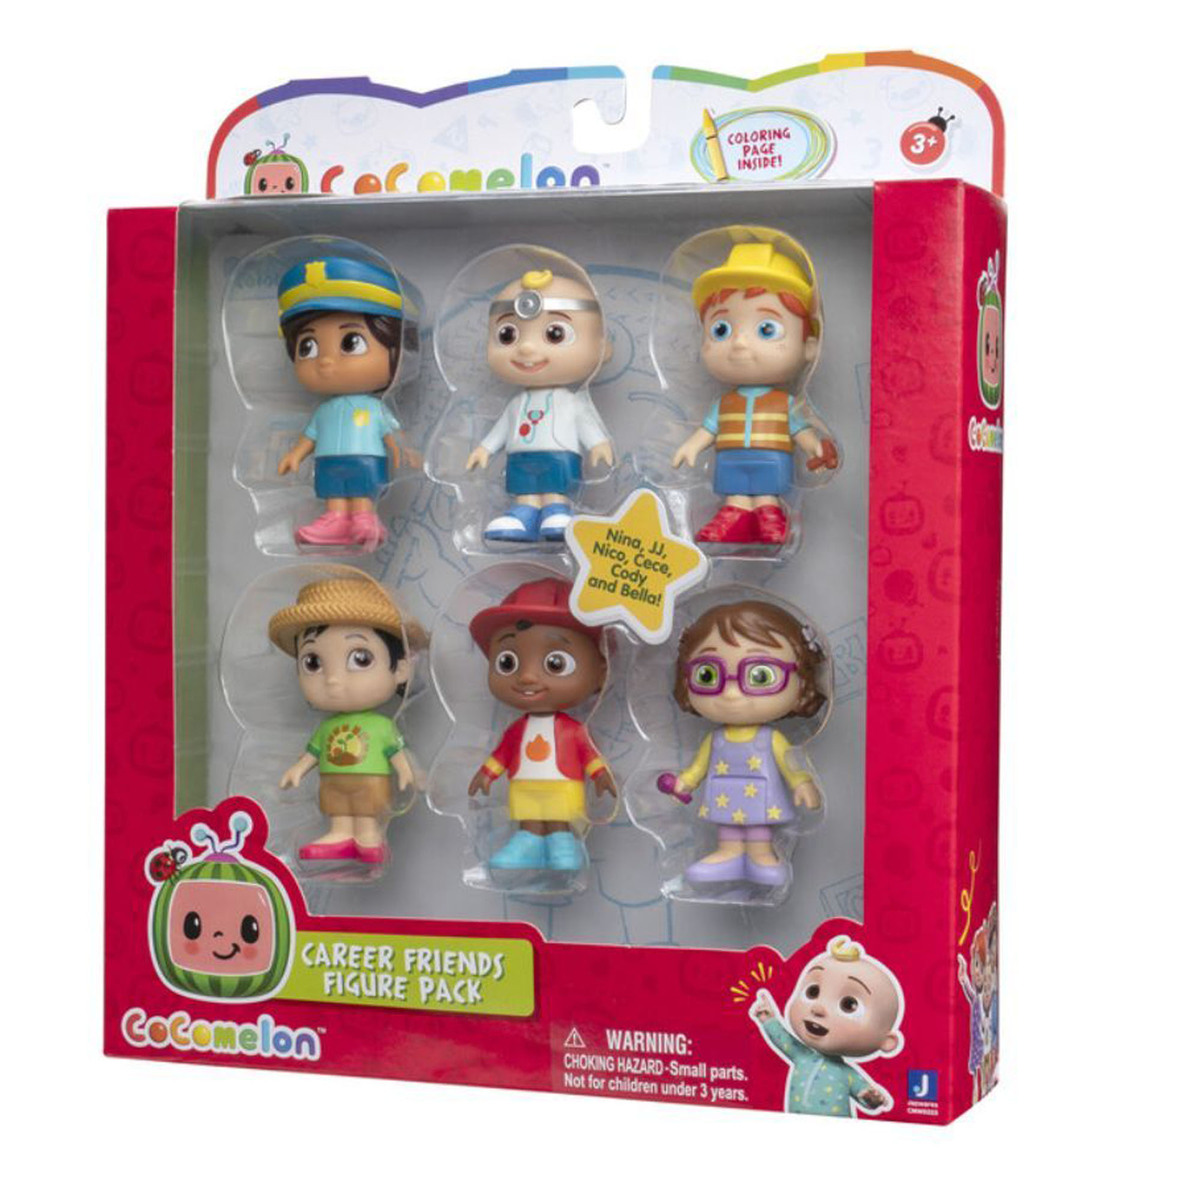 Cocomelon Career Friends 6 Figure Pack, CMW0223